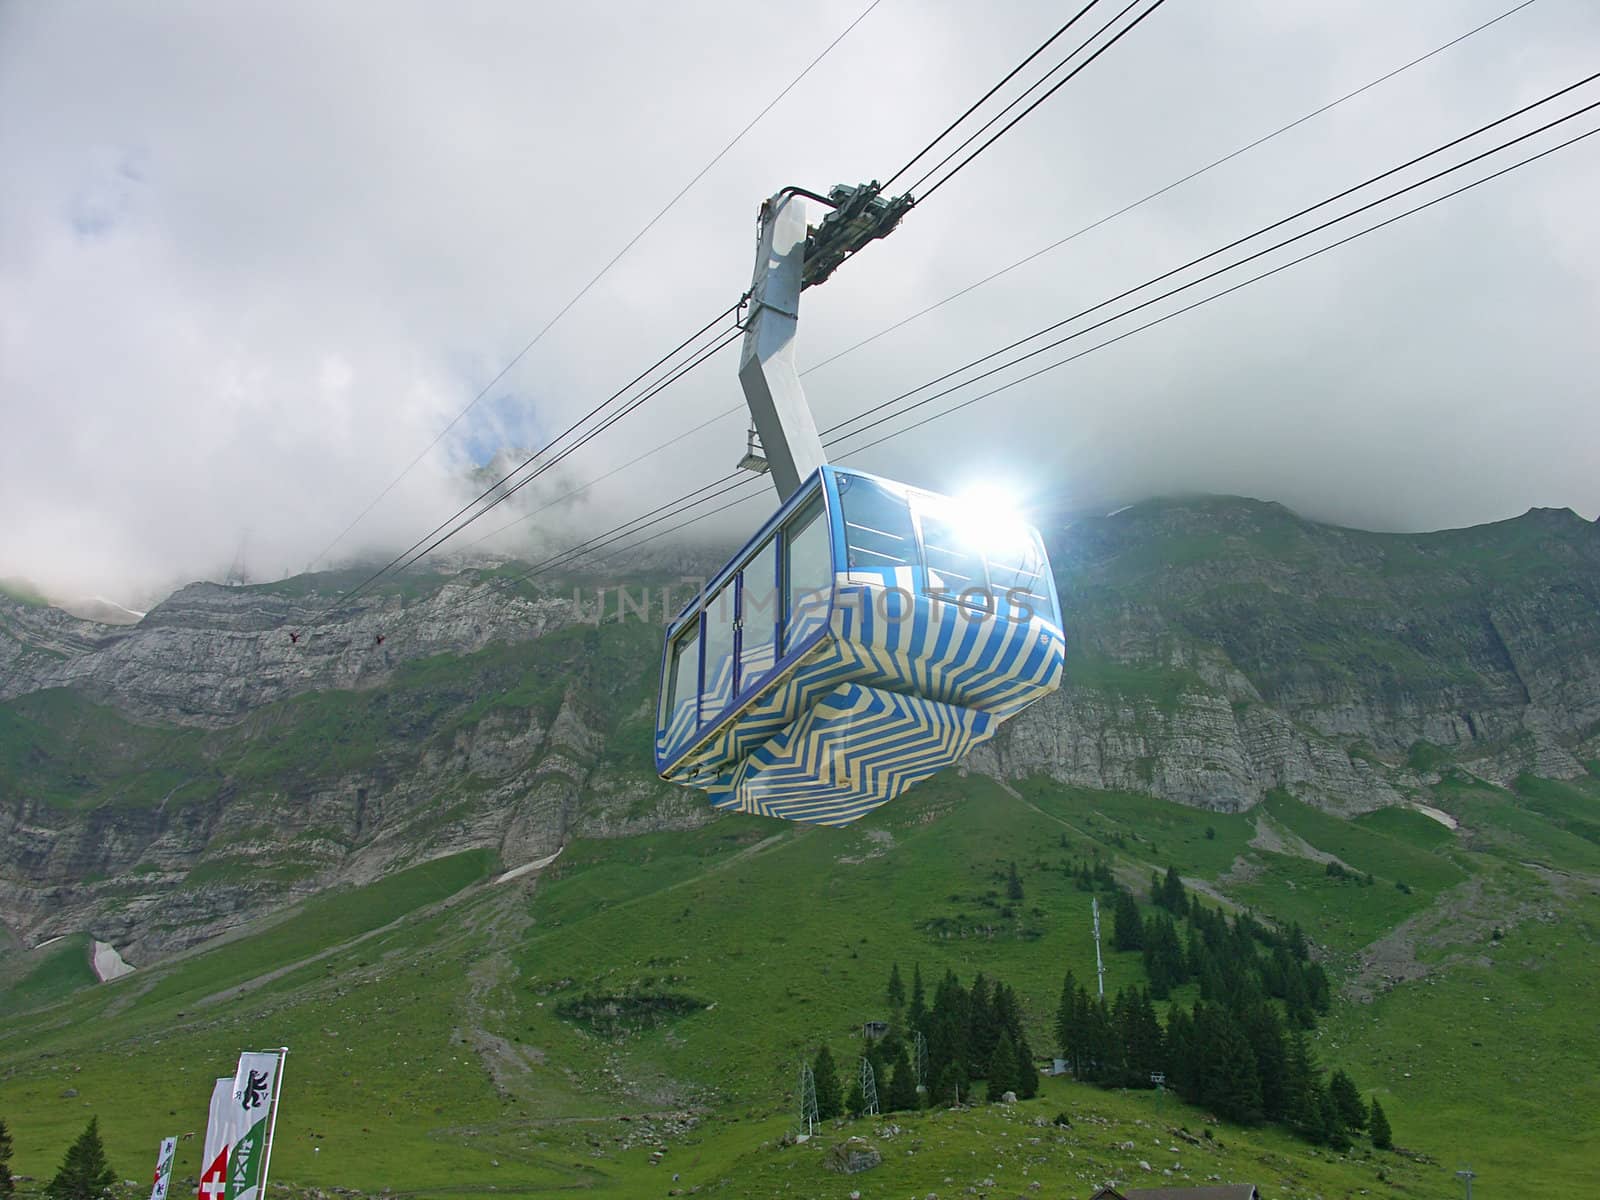 Cable car by Dan70